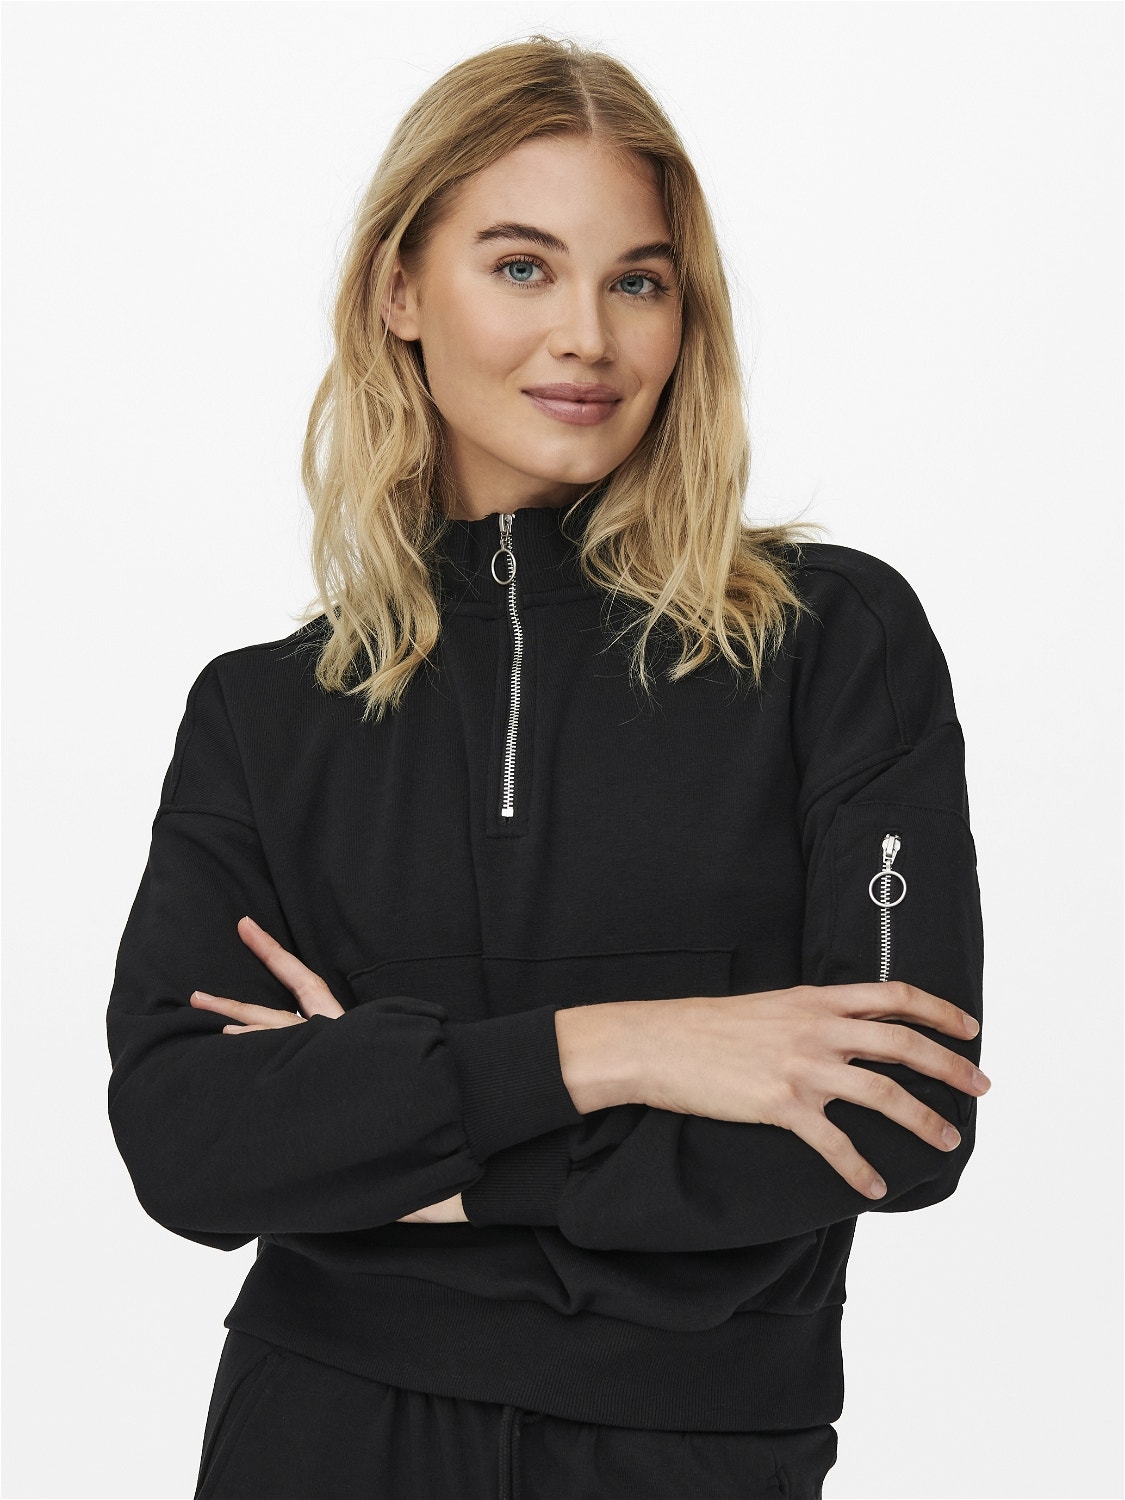 ONLY Col montant Sweat-shirt -Black - 15236602